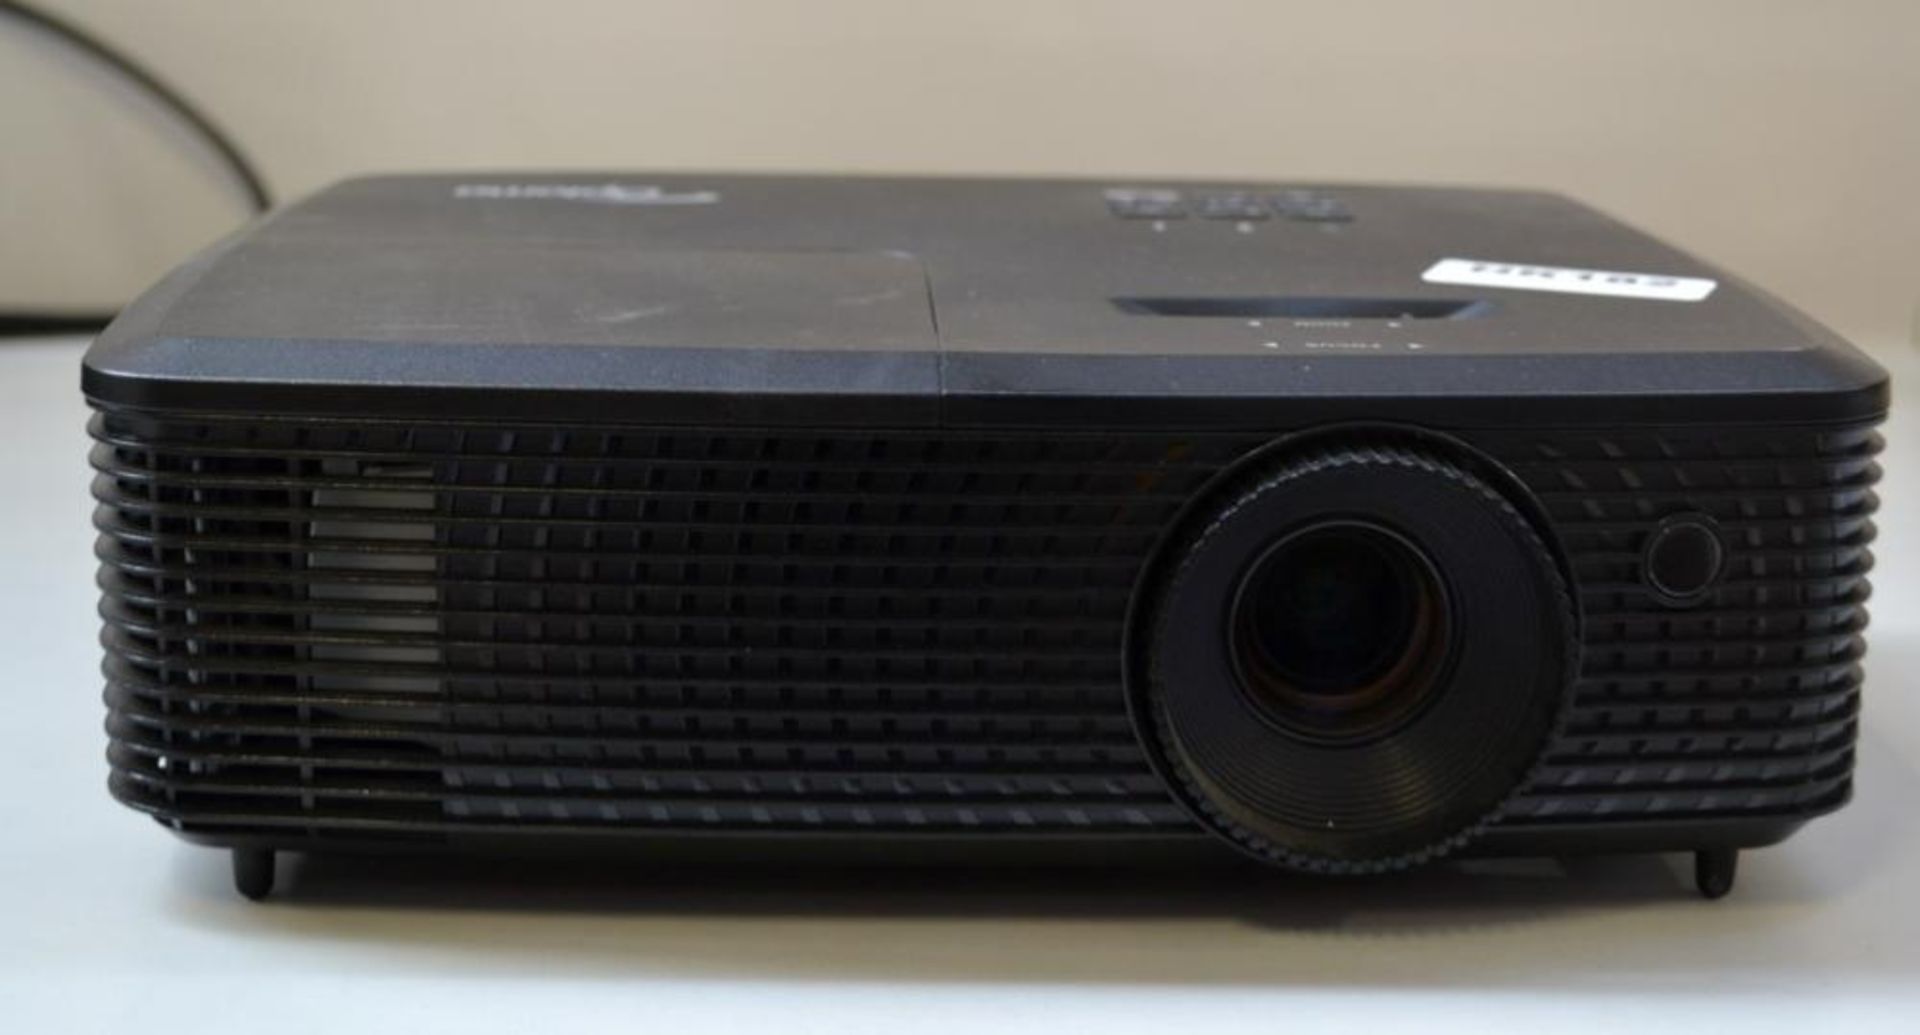 1 x Optoma Projector S331 Black - Ref HK182 - CL394 - Location: Altrincham WA14 - HKPal2 As - Image 6 of 6